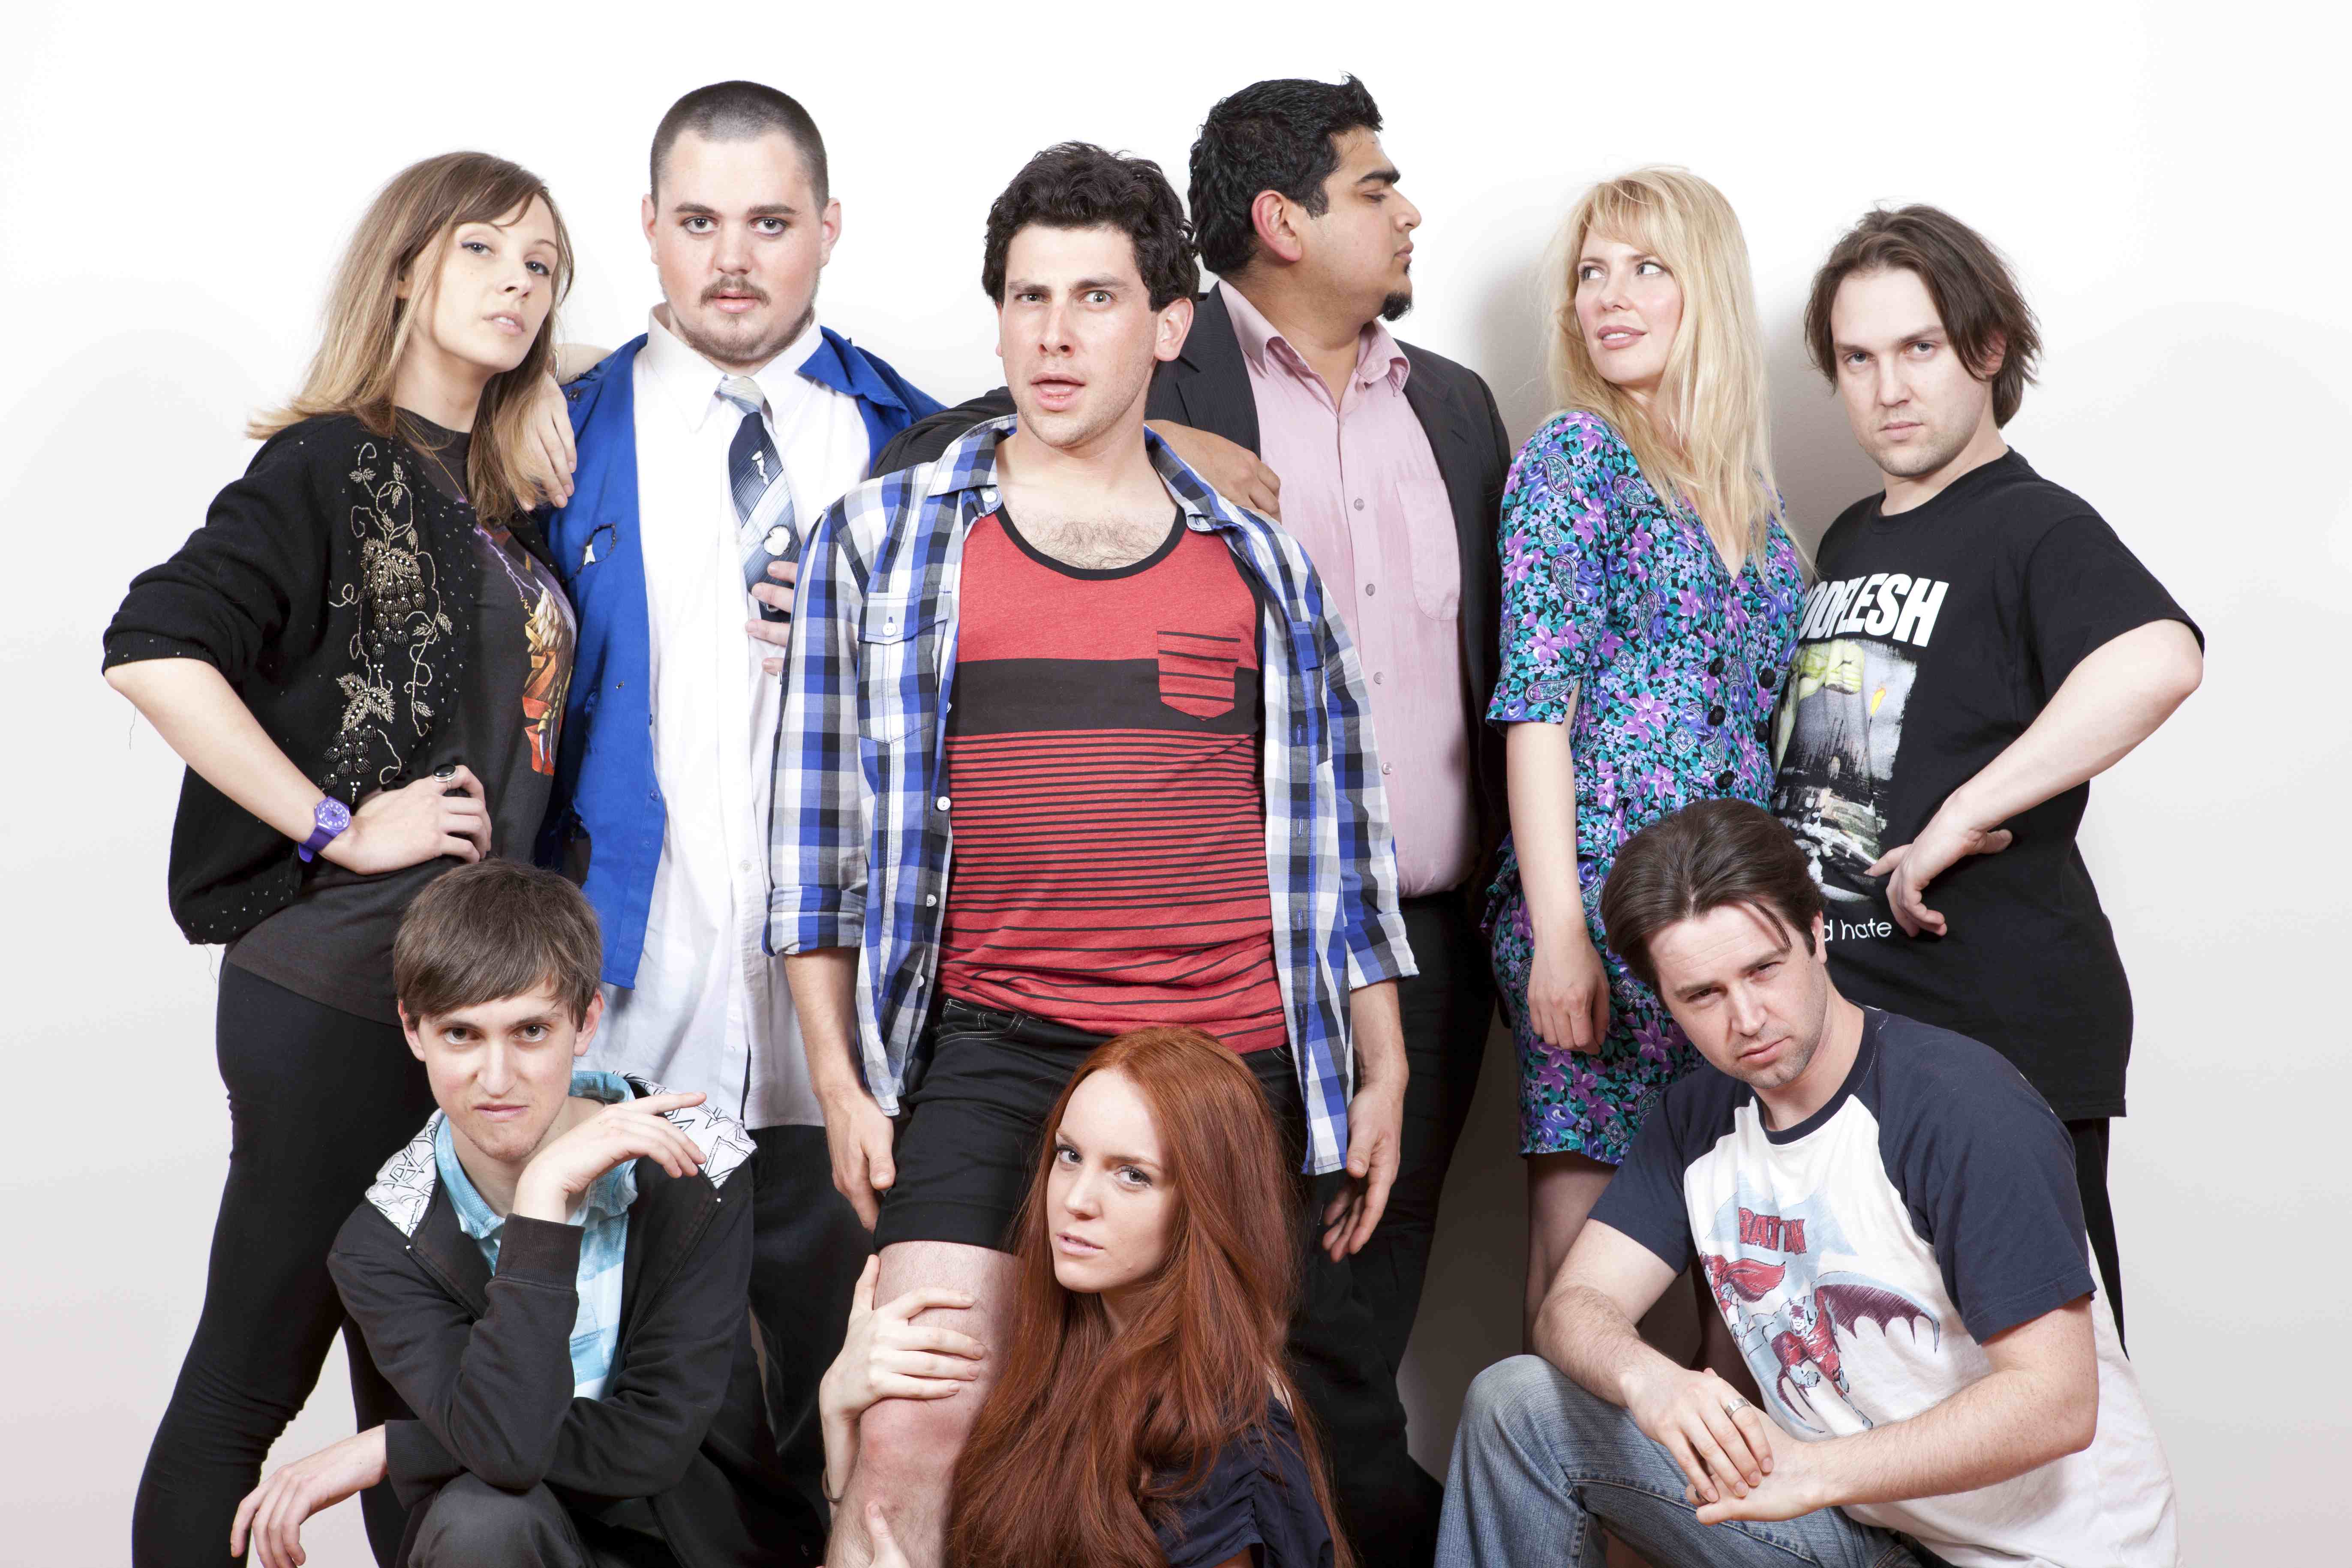 Promo Pic for Melbourne based comedy troupe The Wrong People